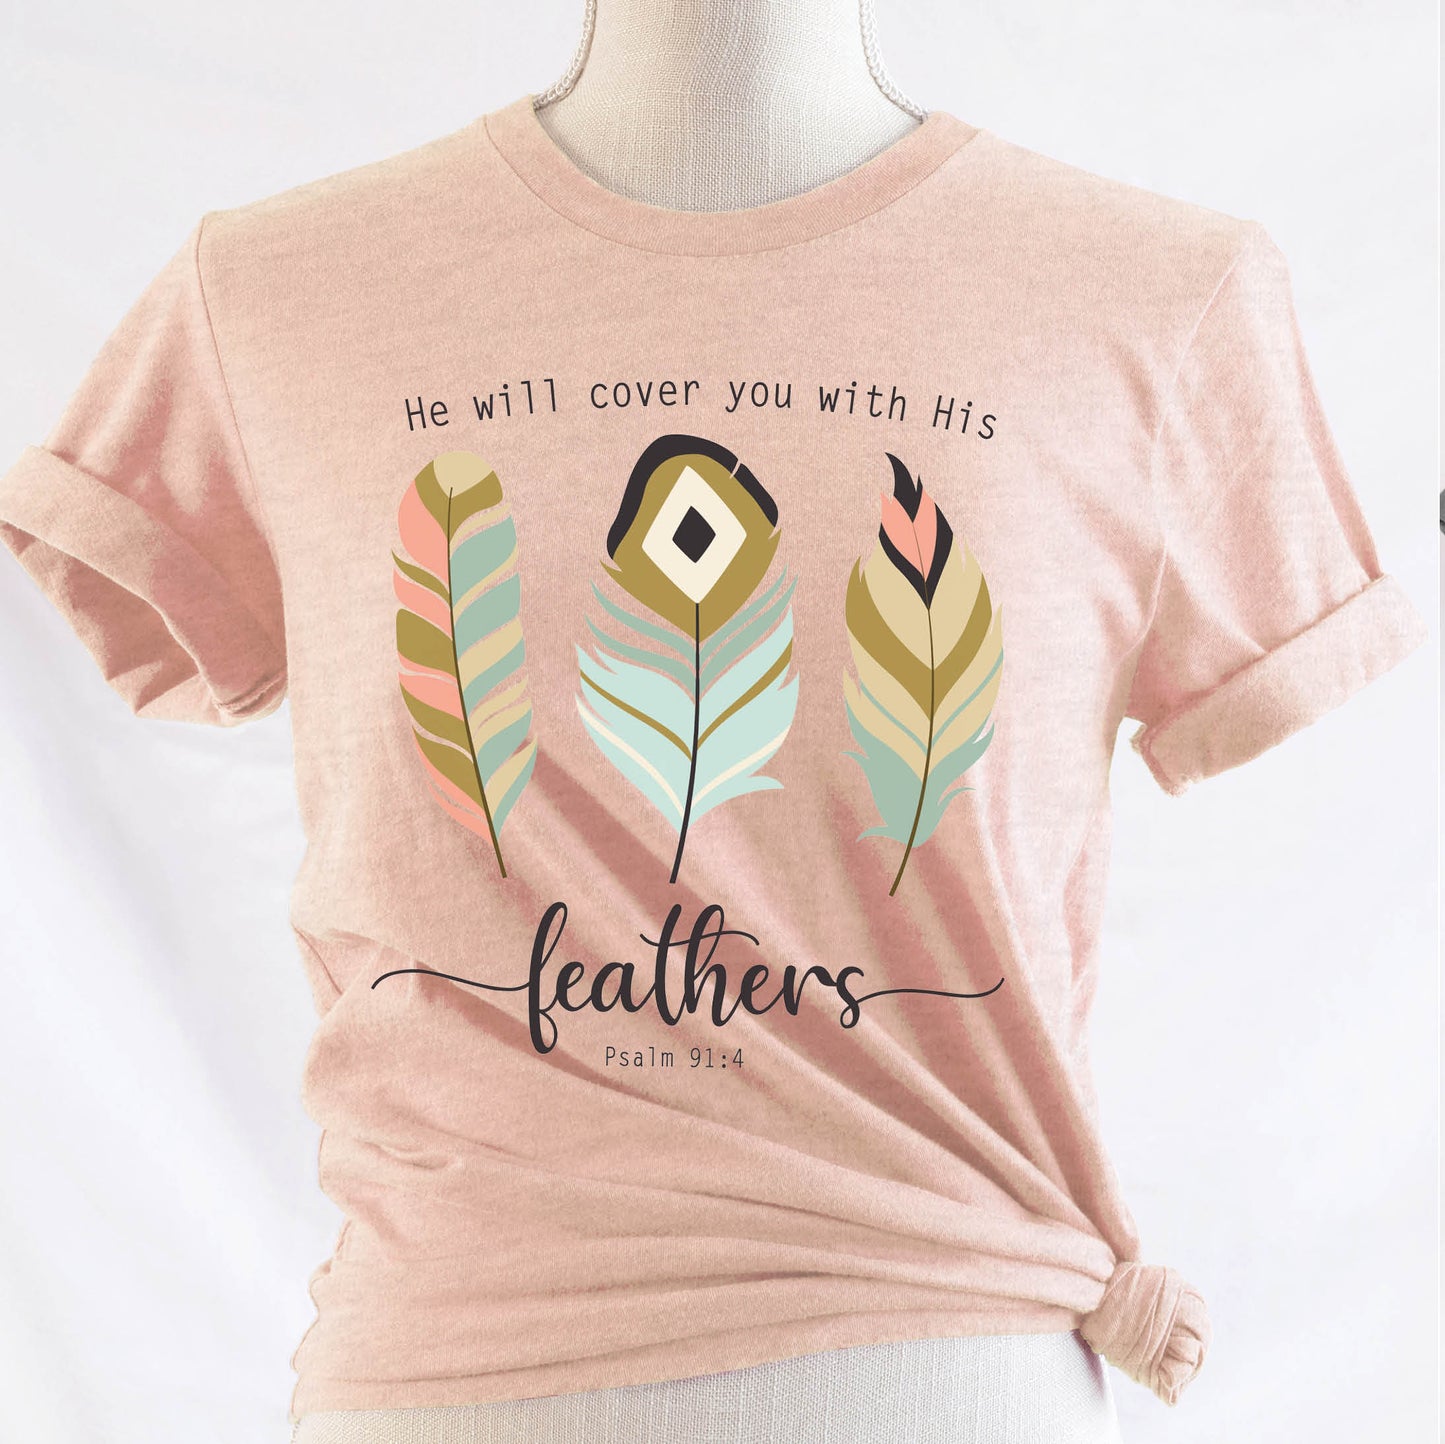 Psalm 91:4 "He Will Cover You With His Feathers" boho bible verse Christian woman aesthetic with teal peach and gold feathers printed on soft heather prism peach unisex t-shirt for women